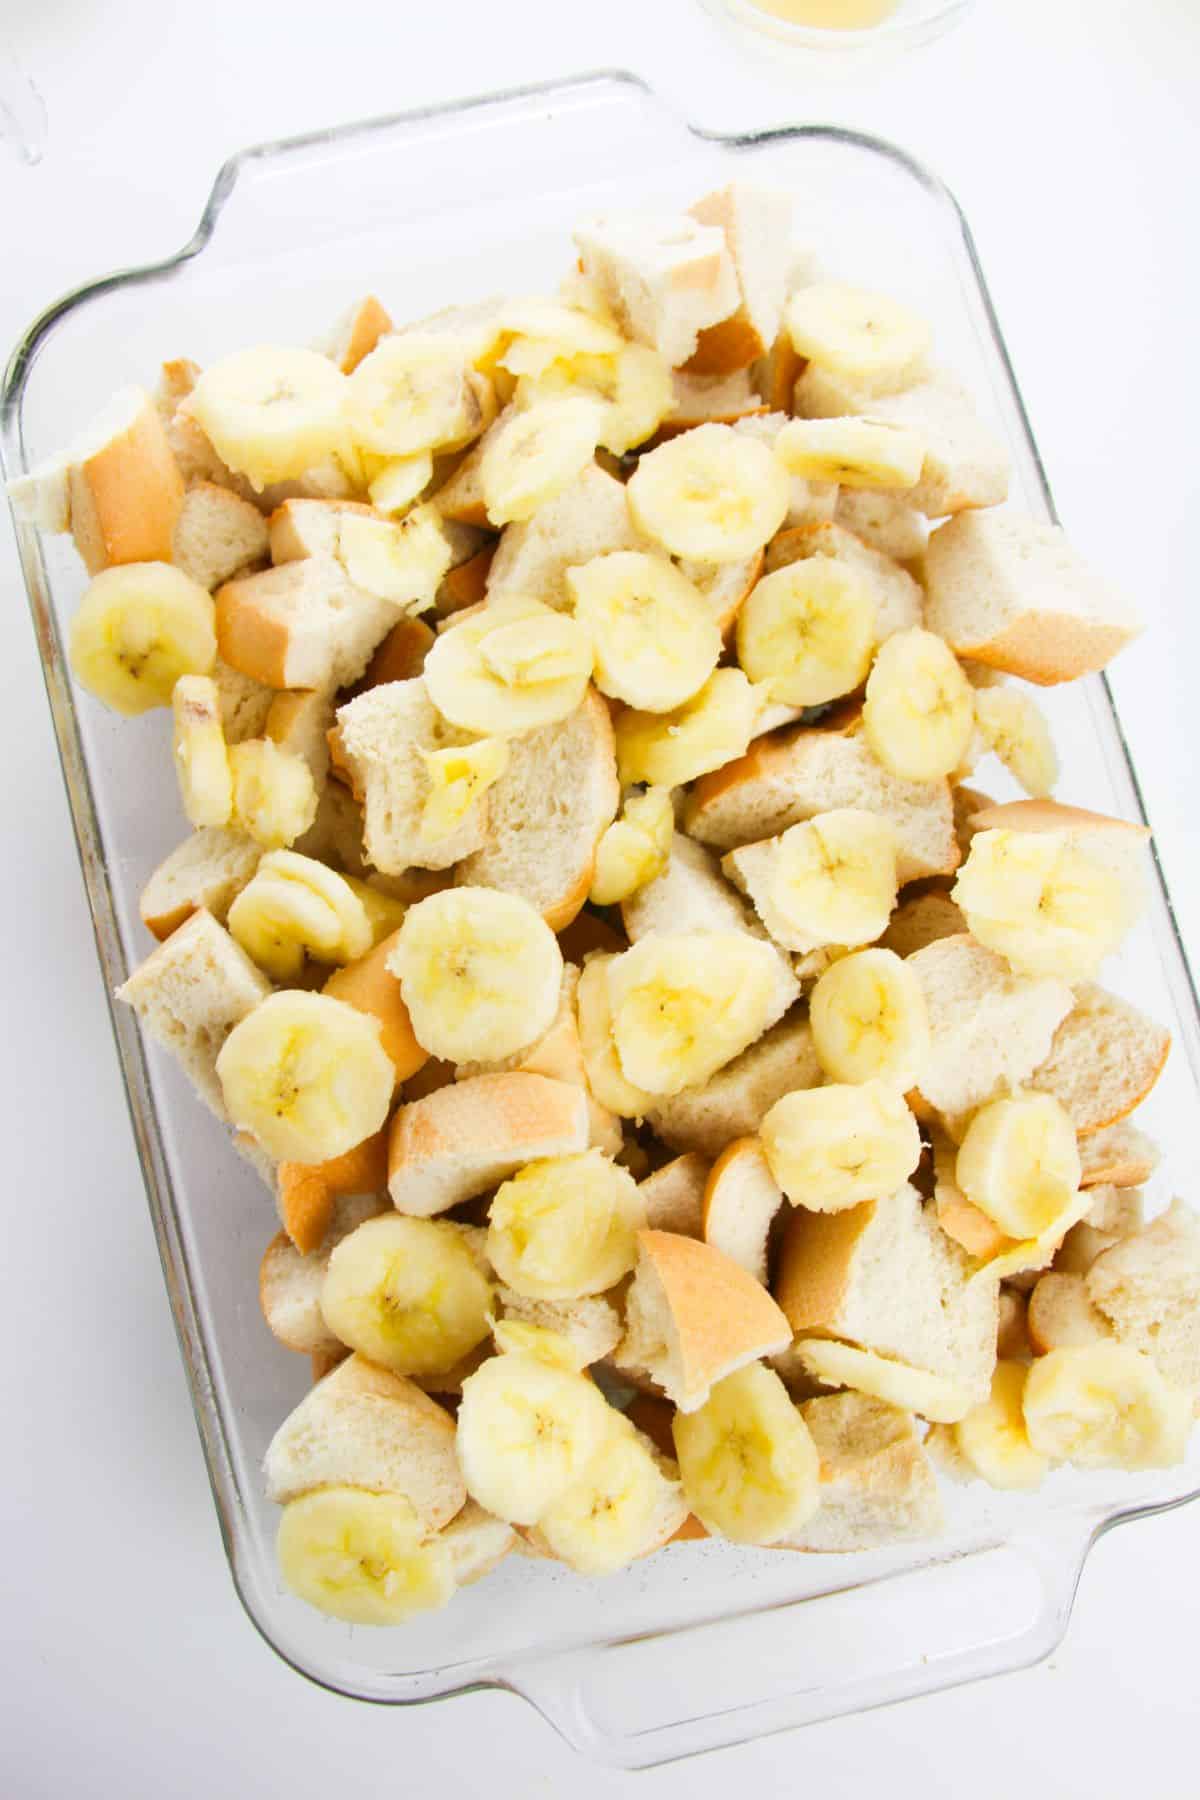 Bread cubes and banana slices in a glass baking dish.